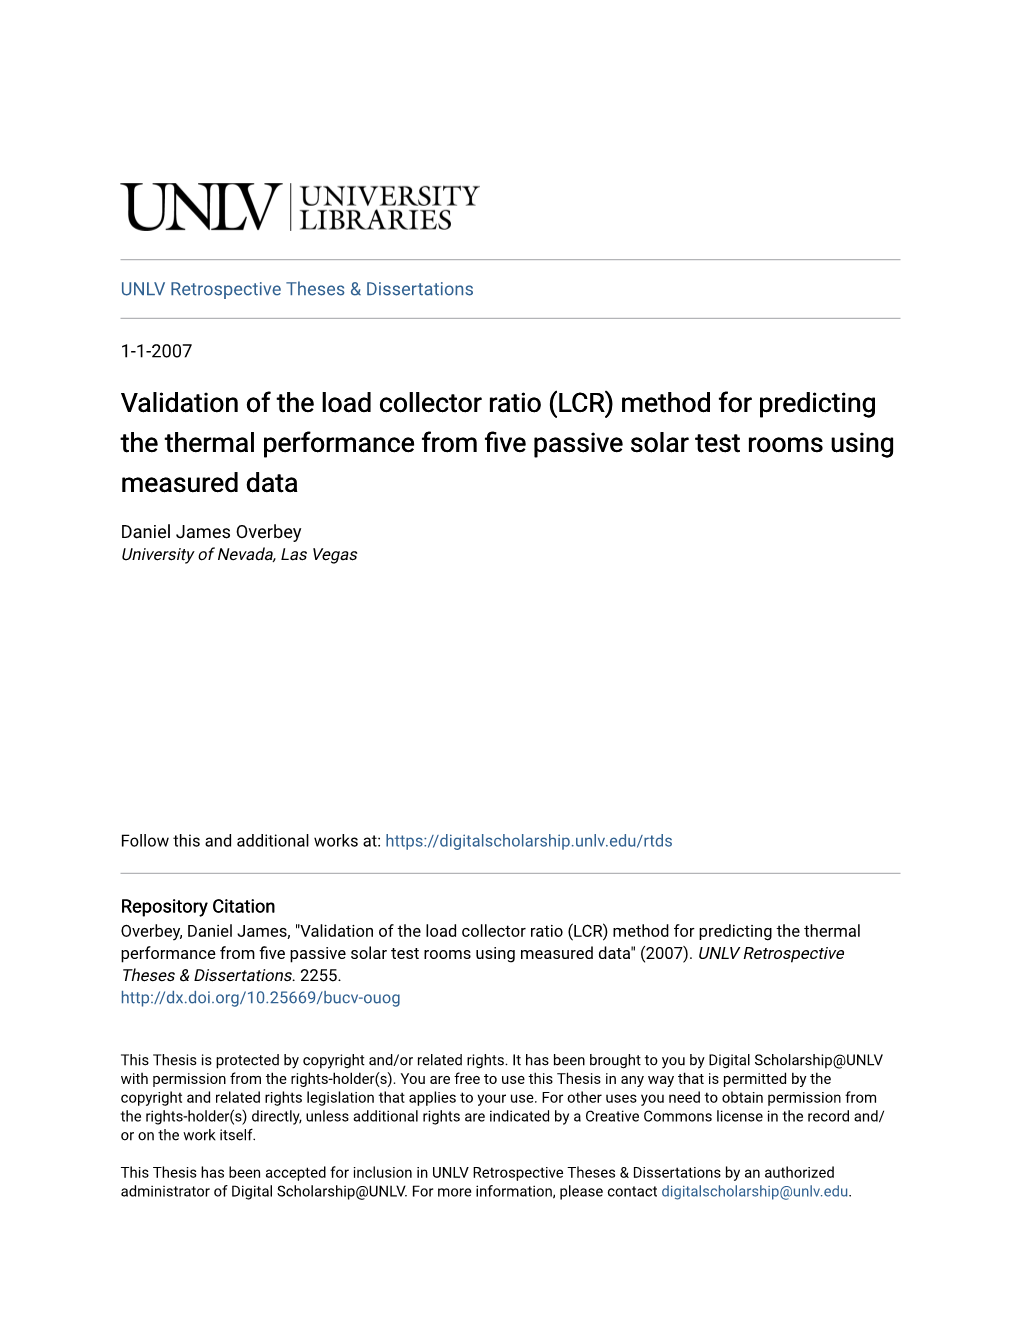 Validation of the Load Collector Ratio (LCR) Method for Predicting the Thermal Performance from Five Passive Solar Test Rooms Using Measured Data